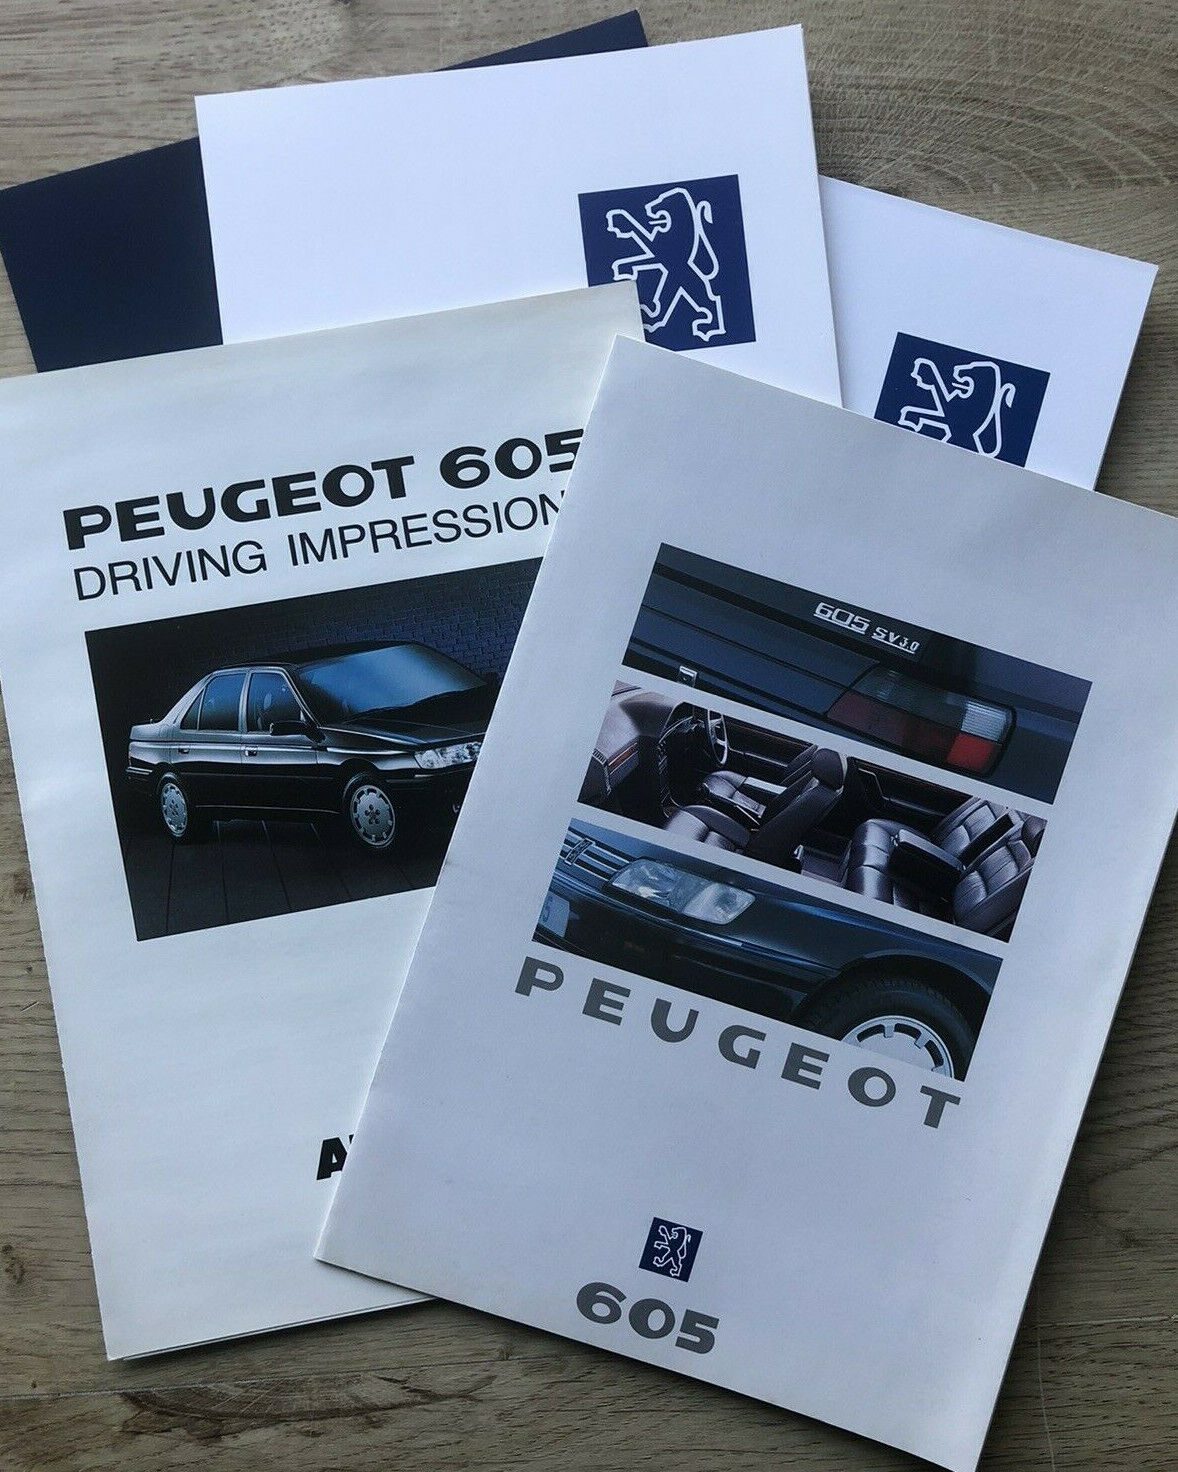 RARE VINTAGE Early 1990s Peugeot Cach inc. Be super welcome 605 brochures Max 55% OFF